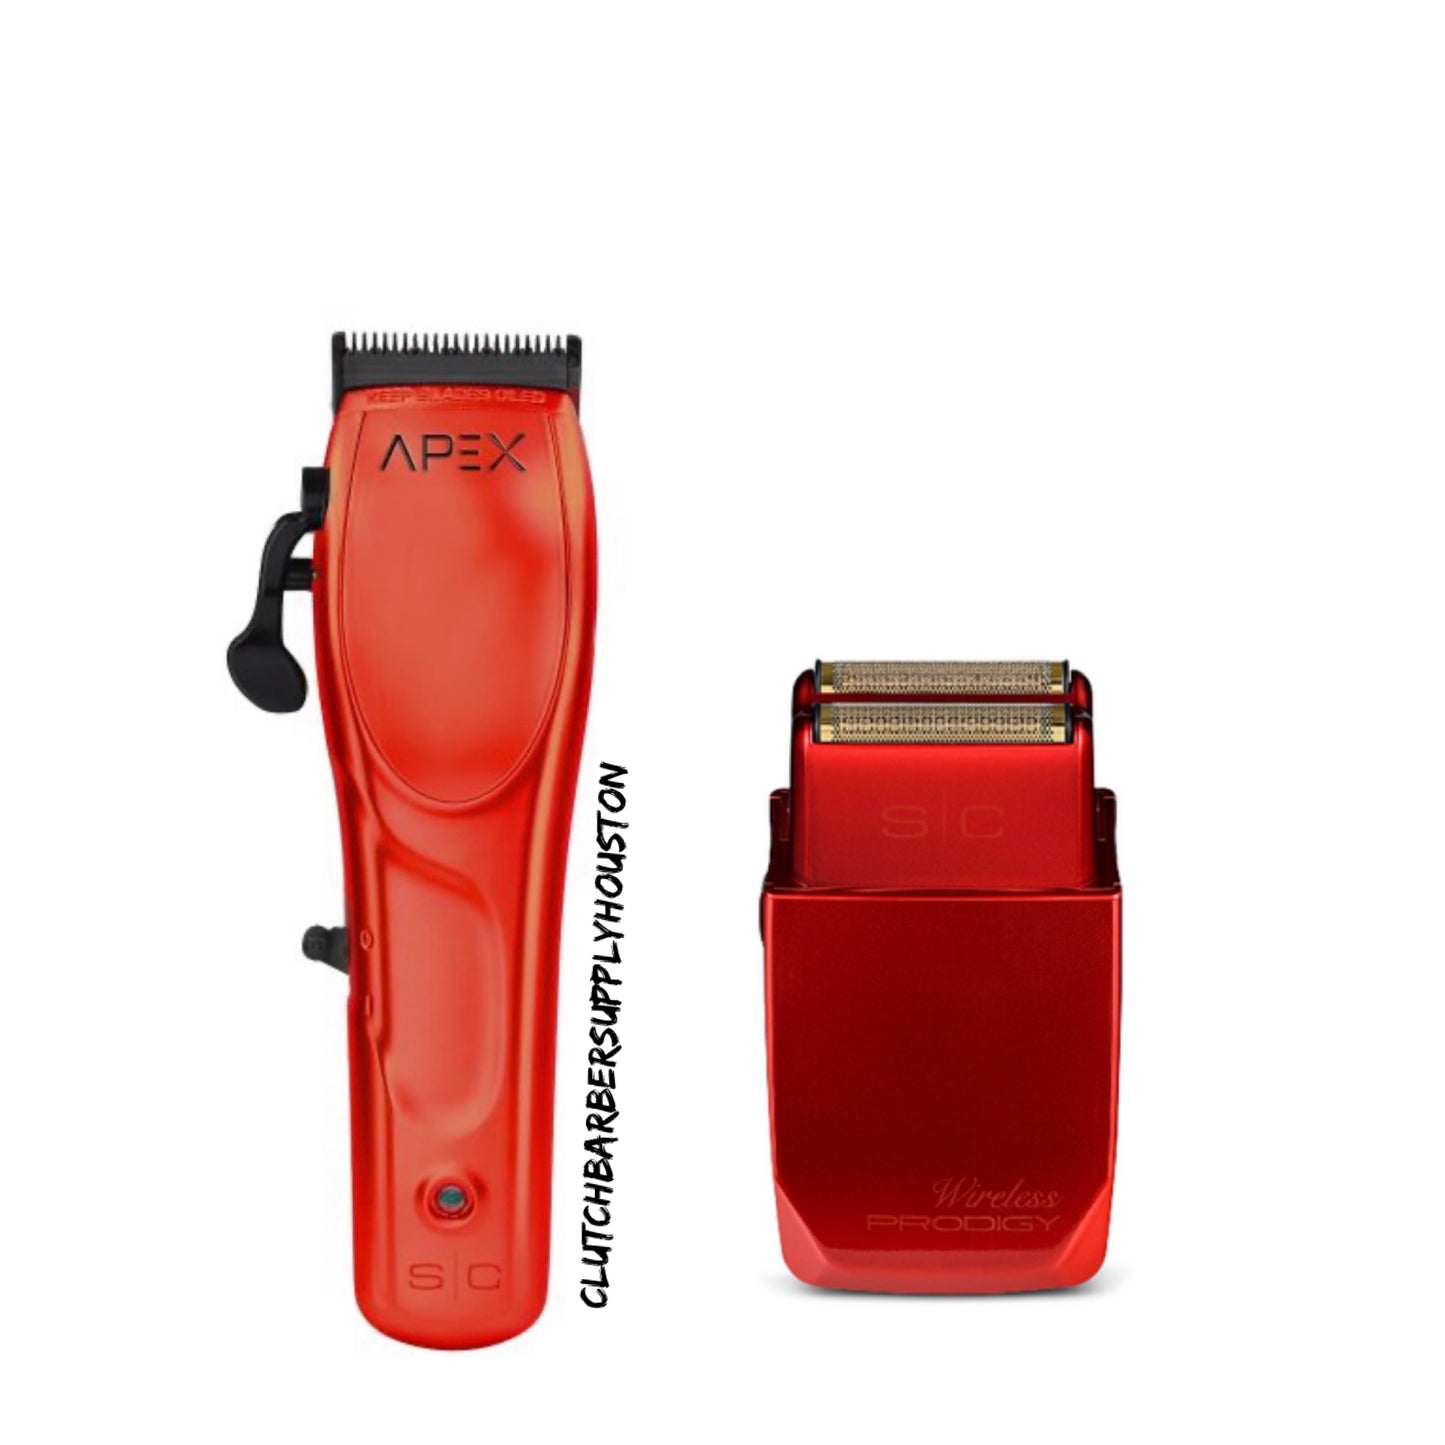 StyleCraft S|C Apex Clipper With a (FREE) StyleCraft Prodigy Cordless Shaver (Red)